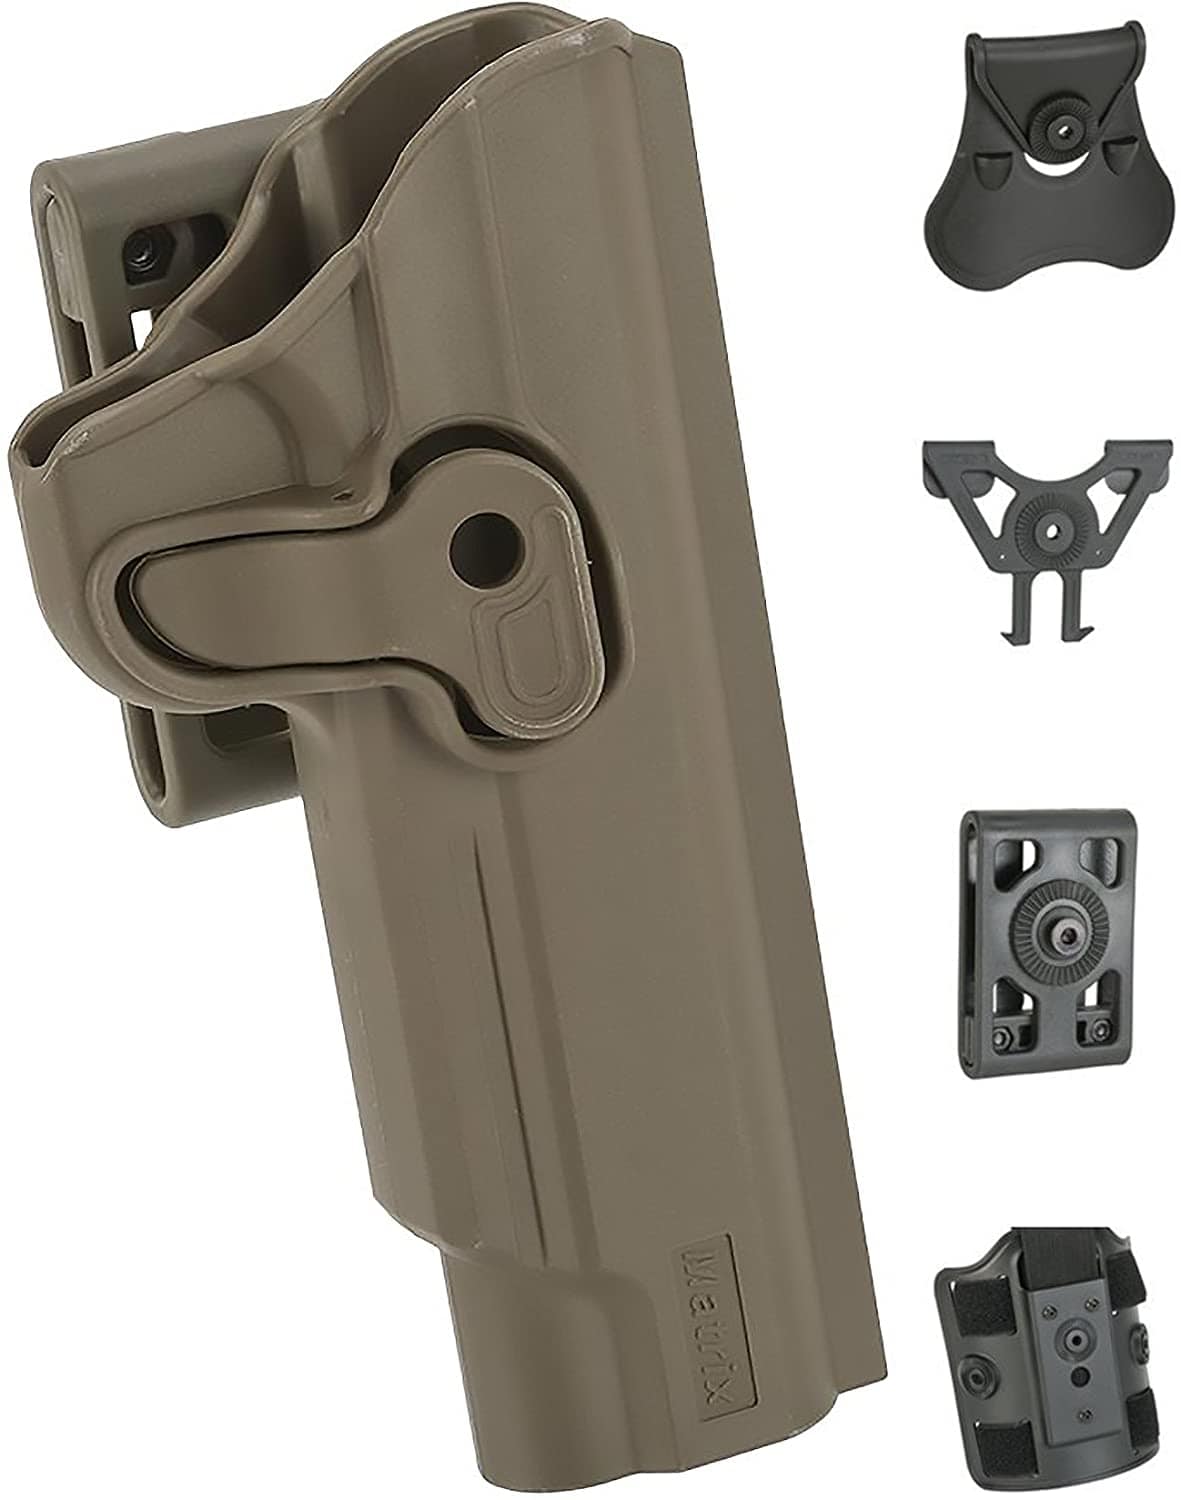 Matrix G3 Hardshell Adjustable Holster for 1911 Series Pistols (Mount: Paddle Attachment) - Eminent Paintball And Airsoft